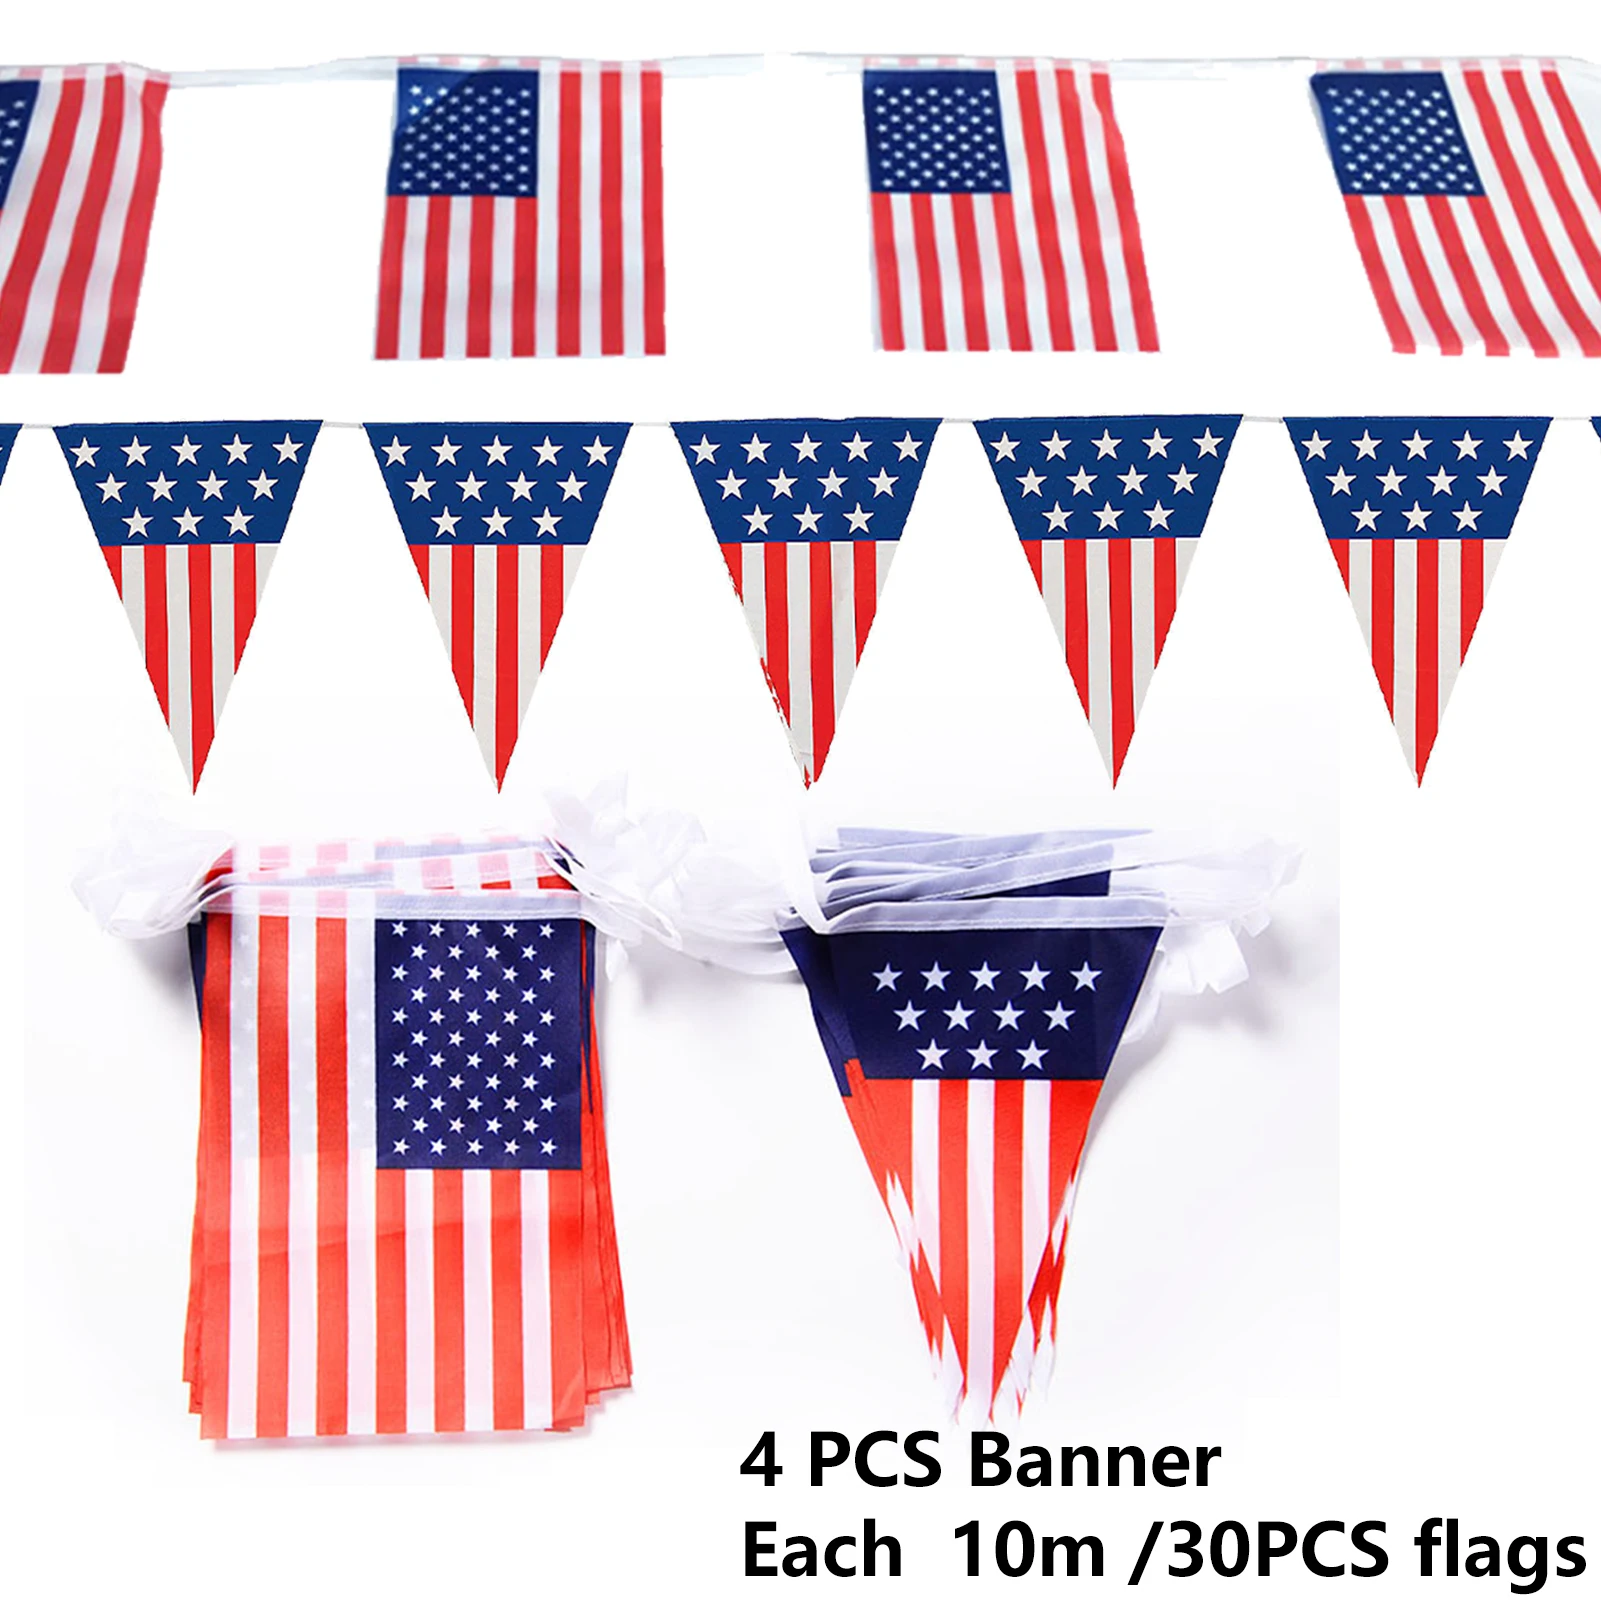 

4pcs Polyester Indoor Outdoor Independence Day Patriotic Washable Exquisite Memorial Bunting Banner Small Durable American Flag